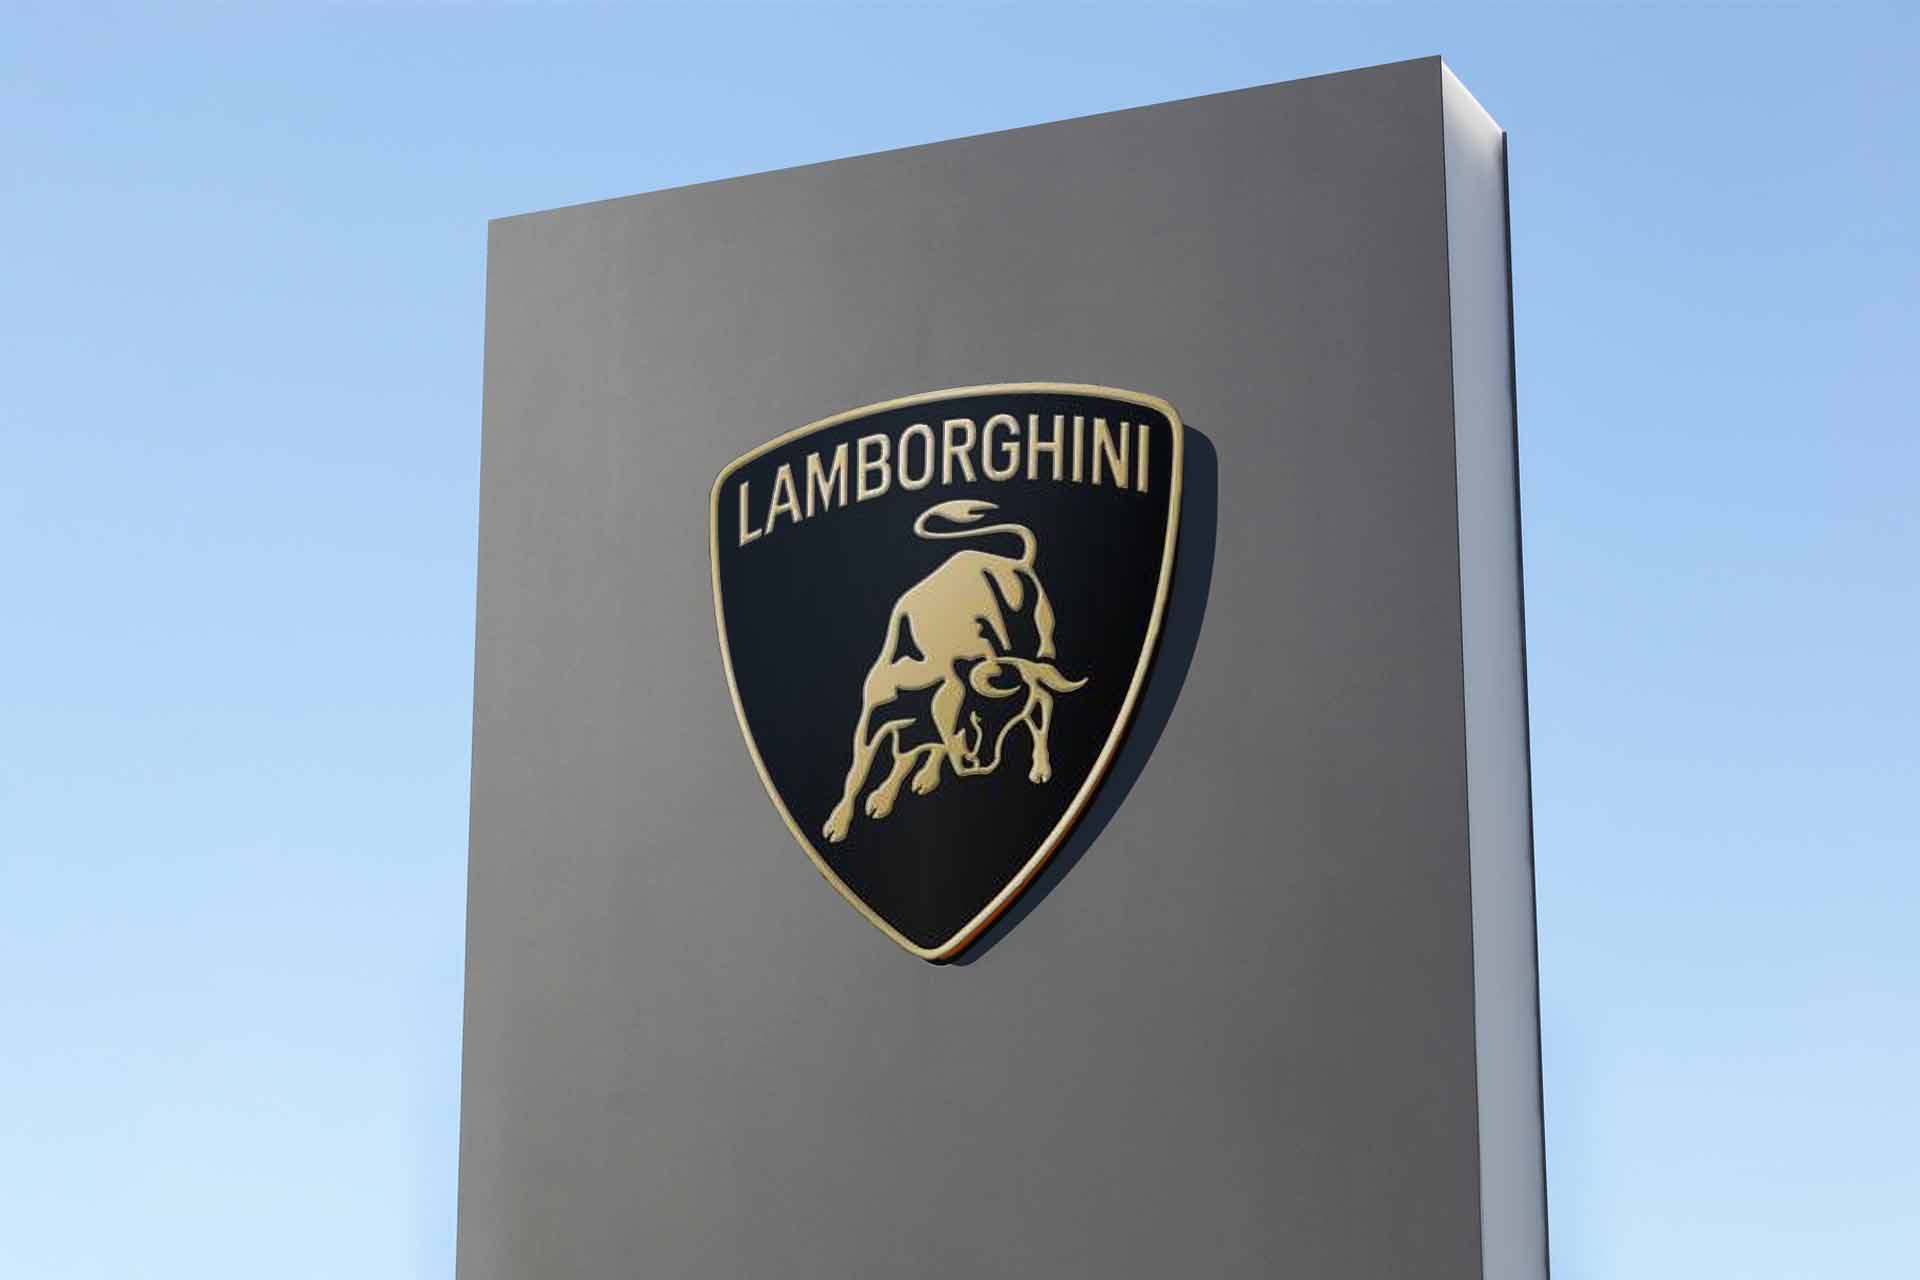 New Lamborghini Logo Unveiled: From Classic to Contemporary